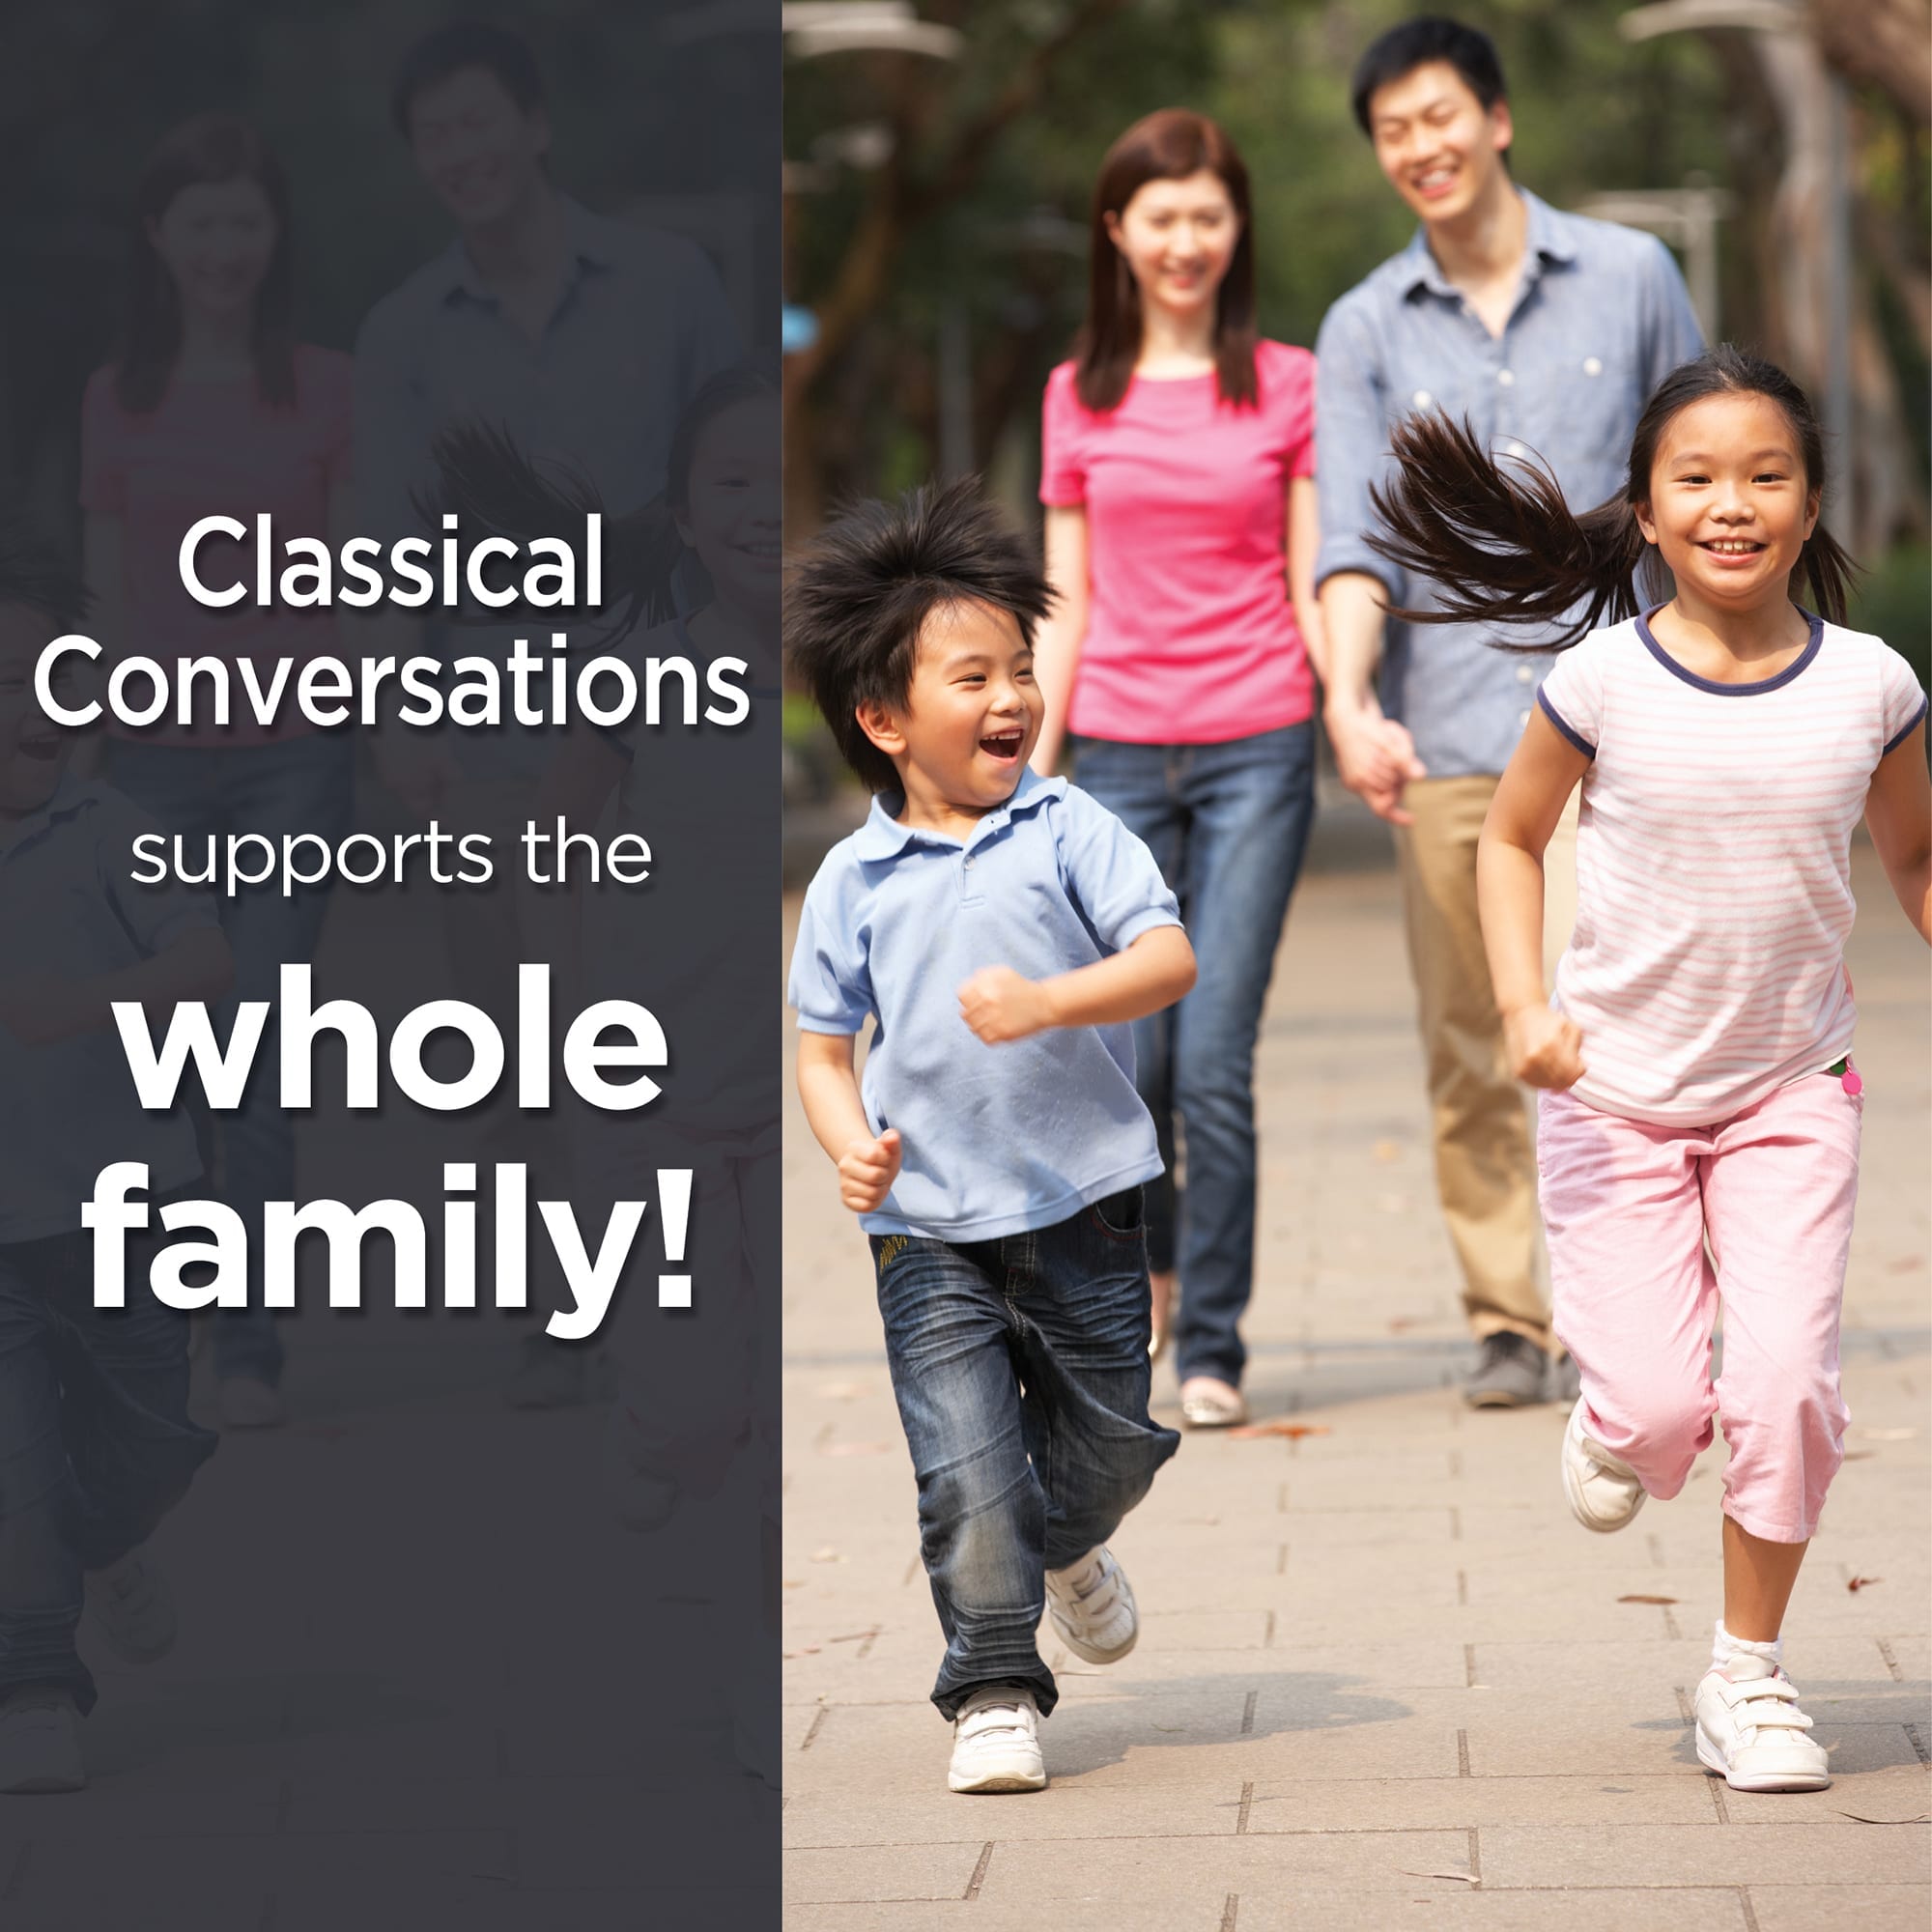 Classical Conversations supports the whole family